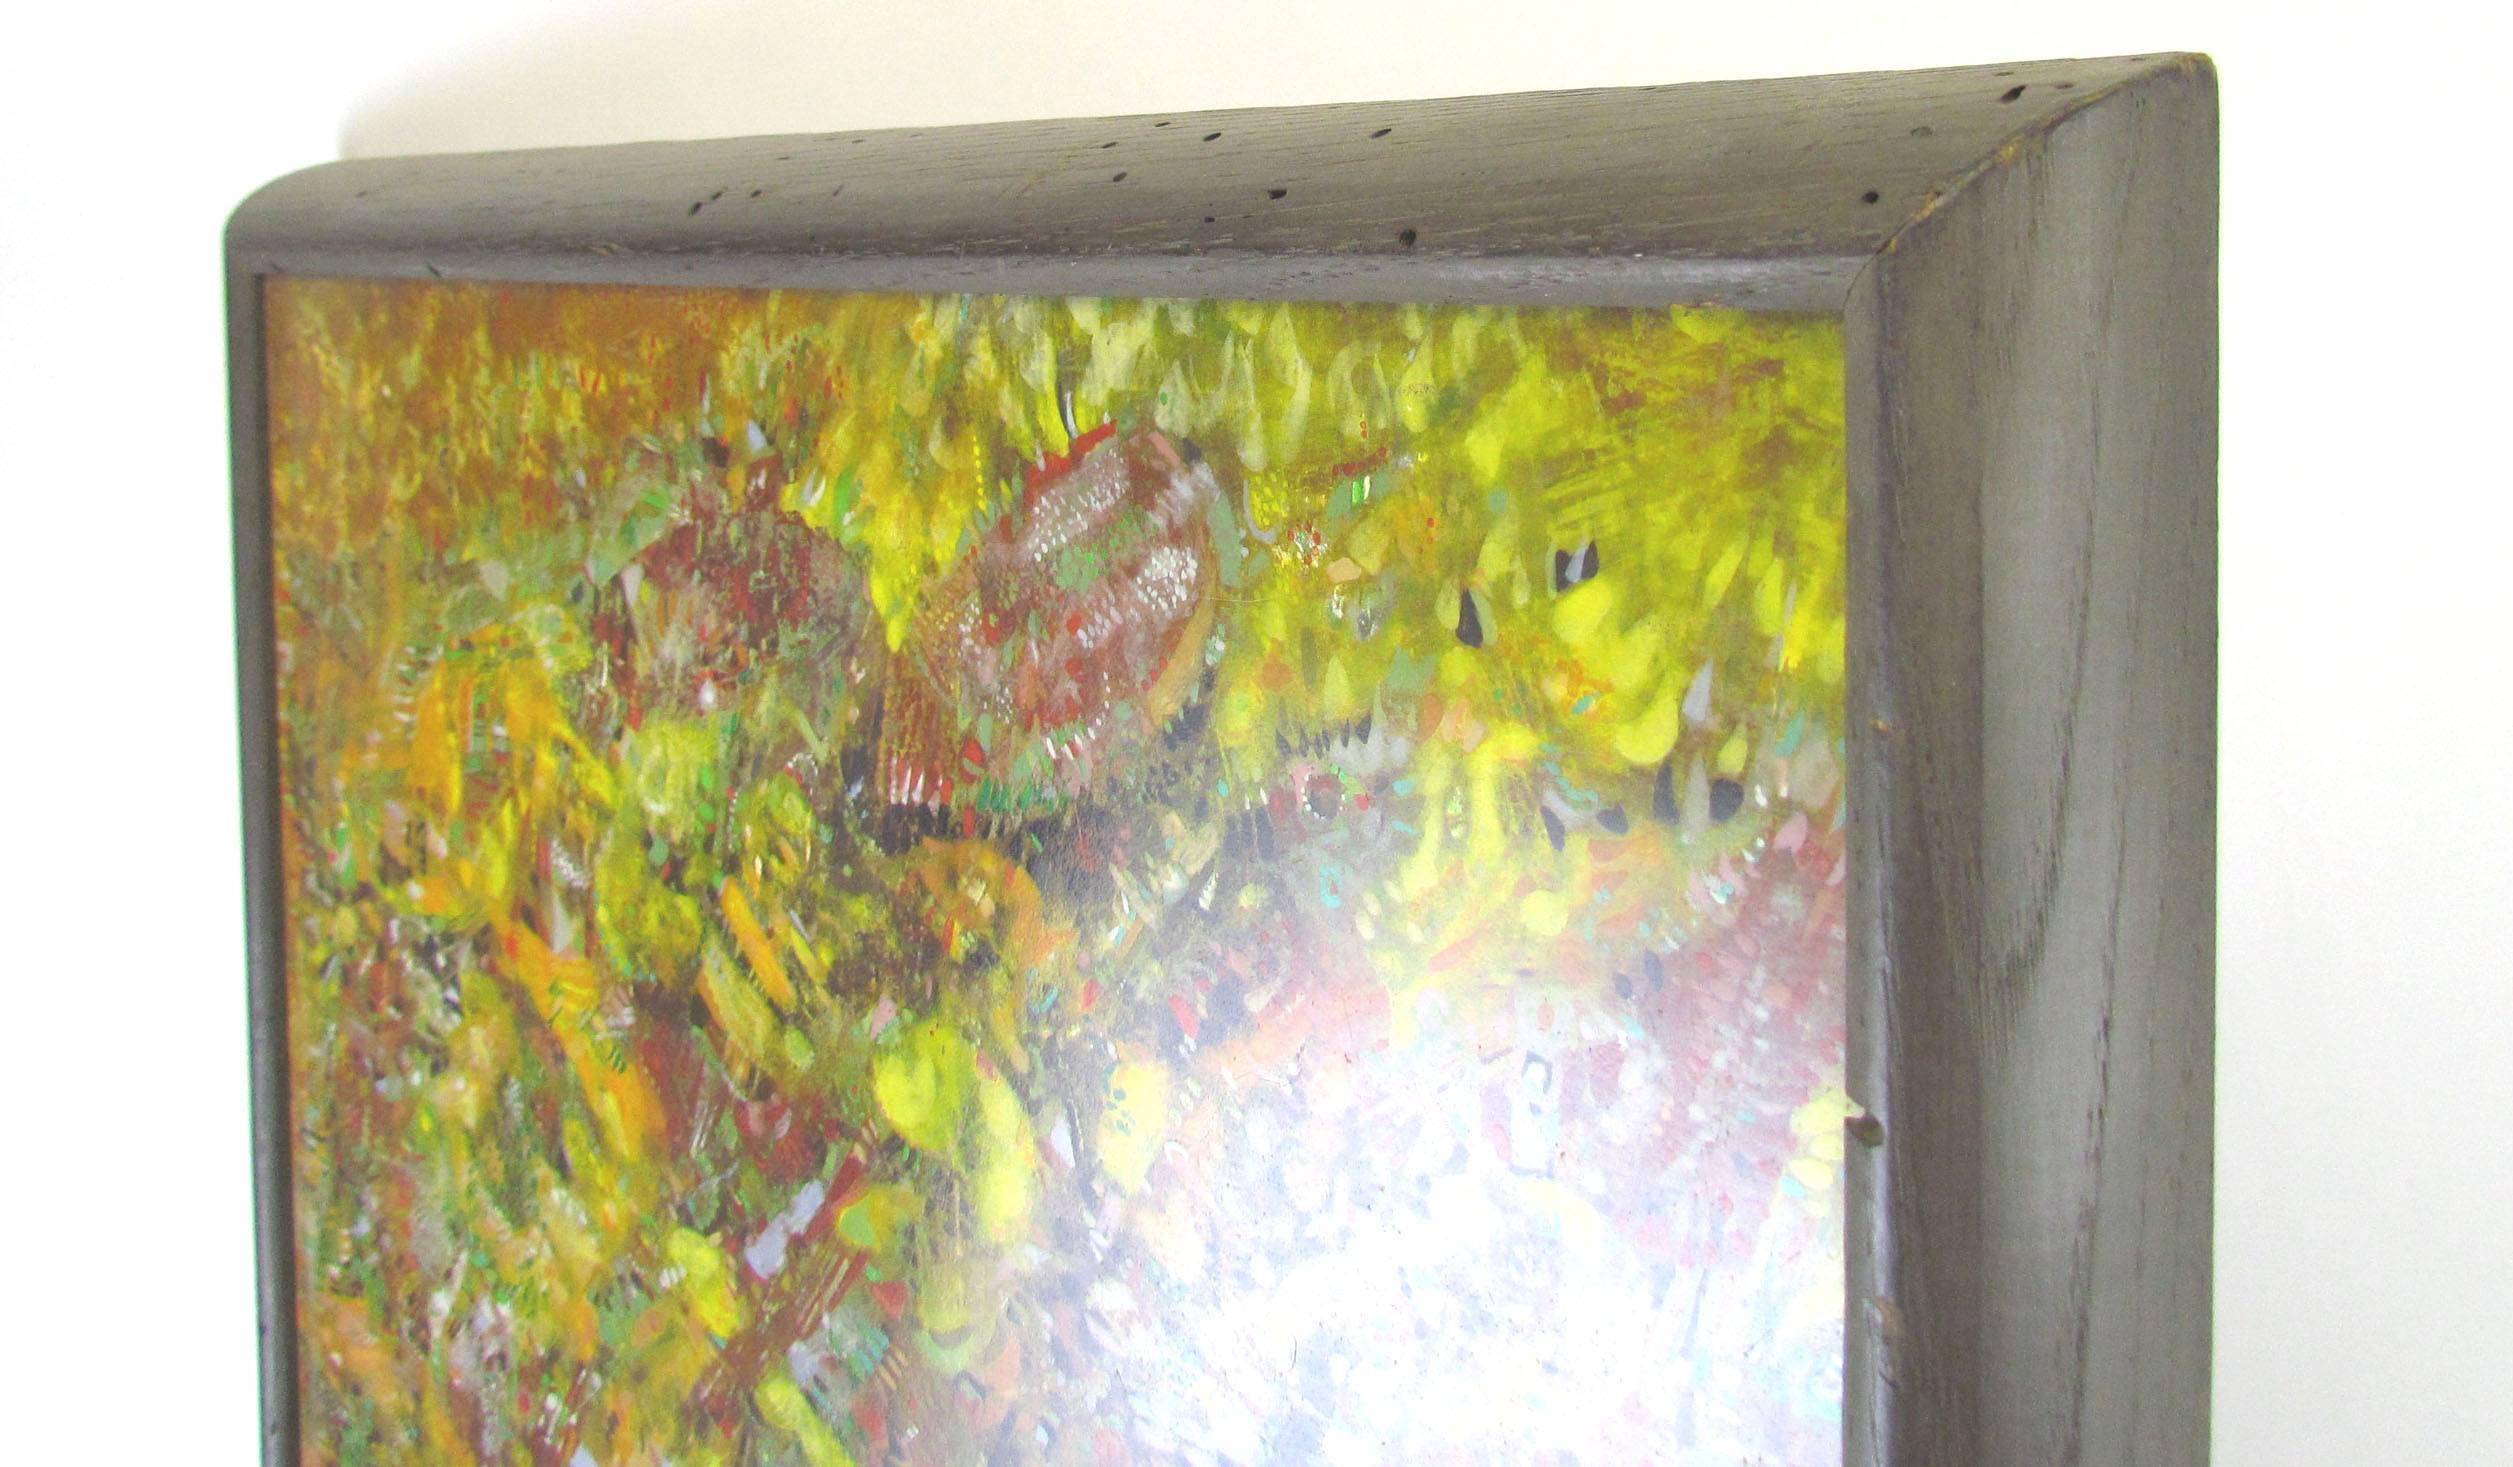 Tempera Abstract Expressionist Painting by William Georgenes, Dated 1962